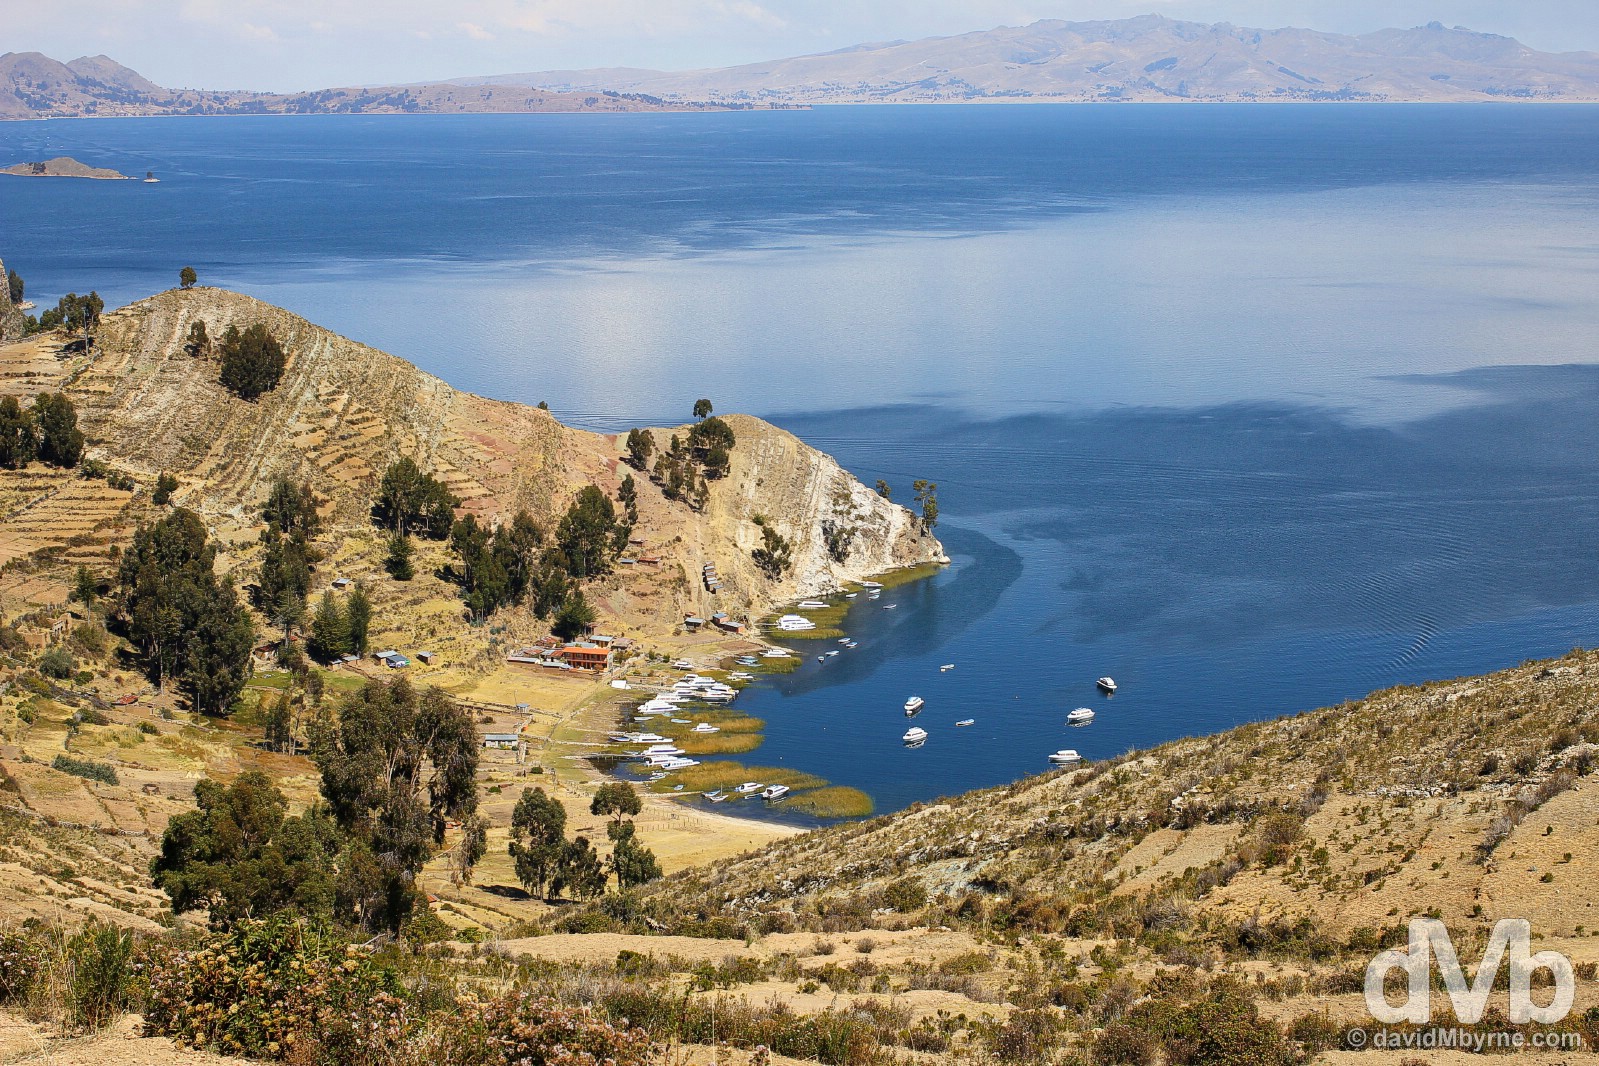 Views from Isla del Sol in Lake Titicaca, Bolivia. August 24, 2015. 